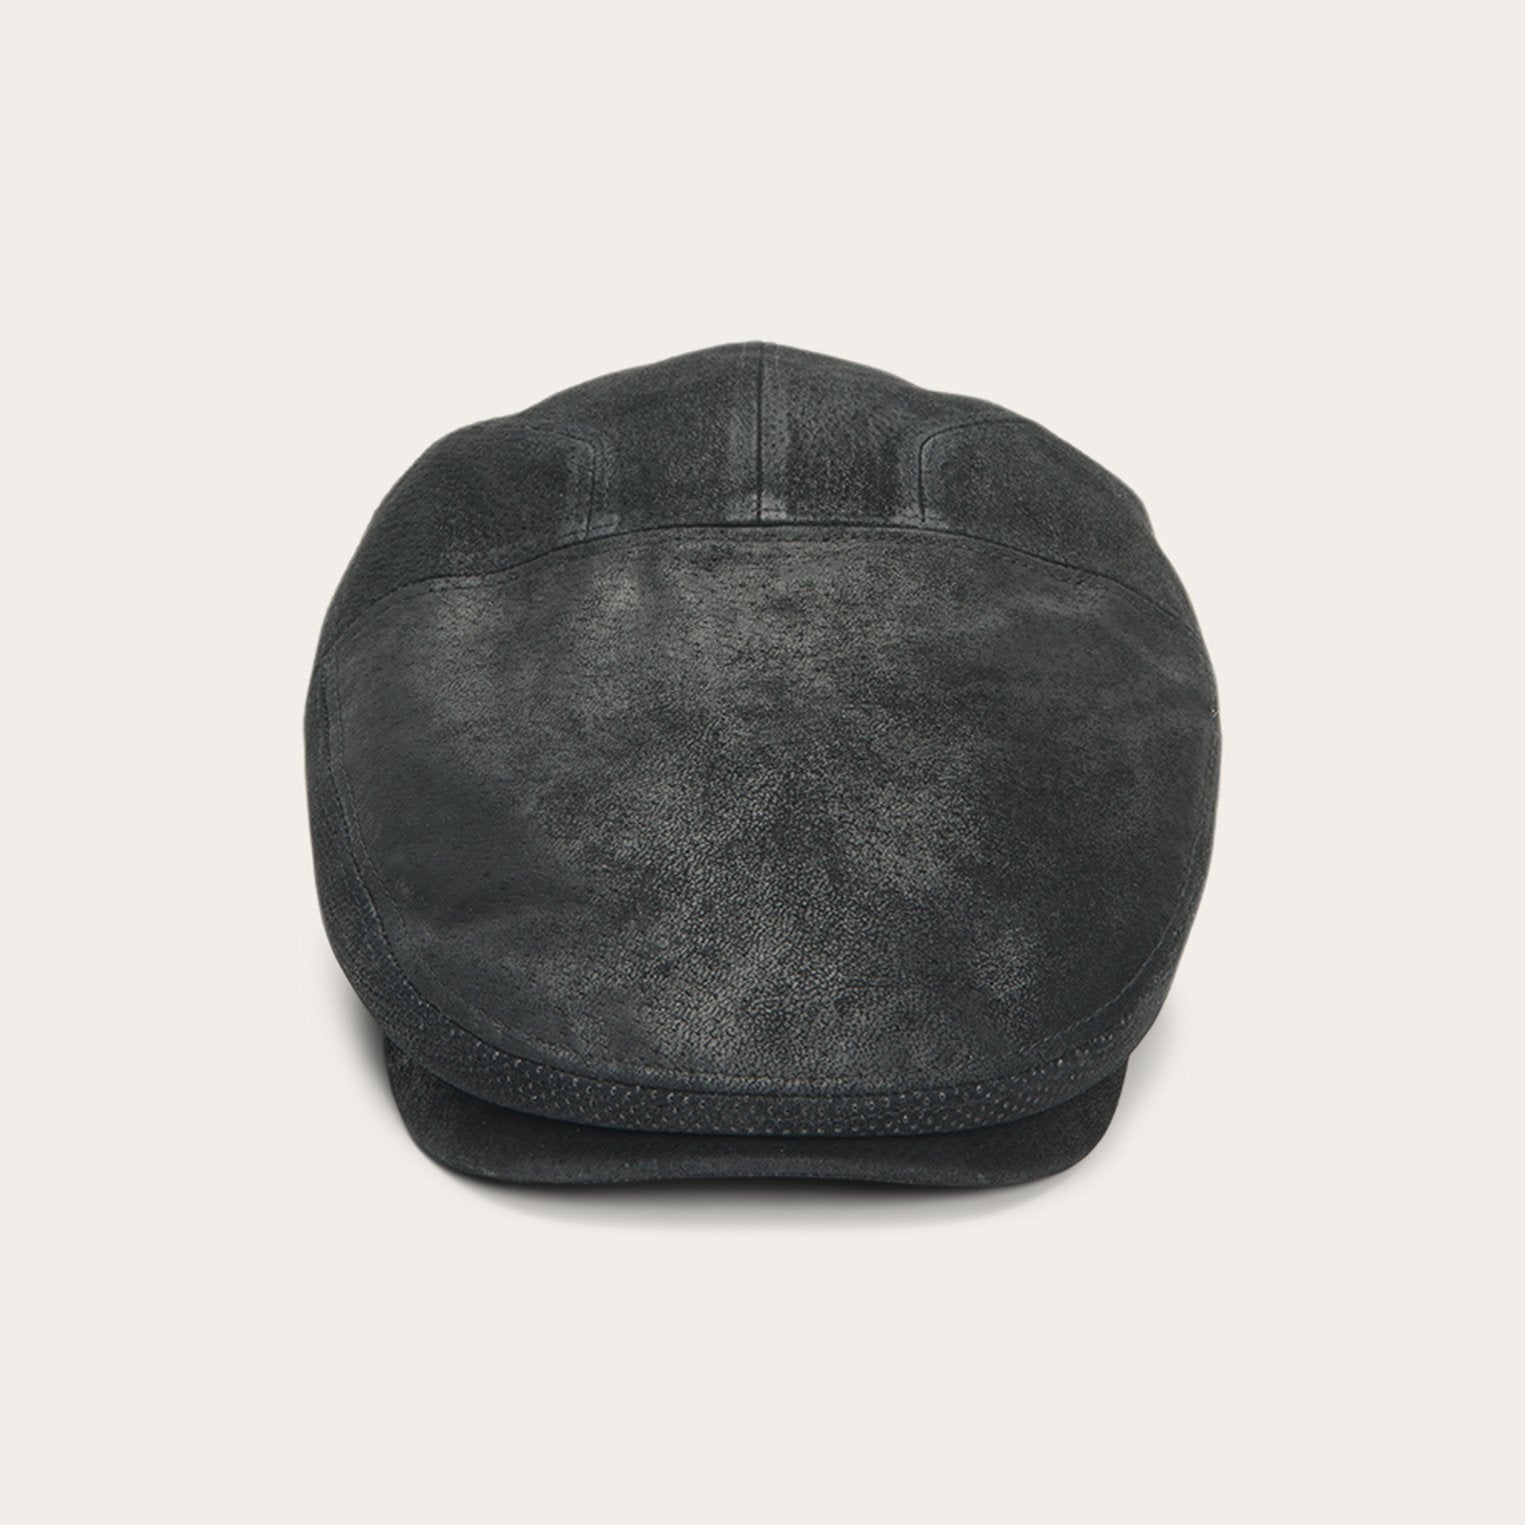 Hood Weathered Leather Ivy Cap Stetson